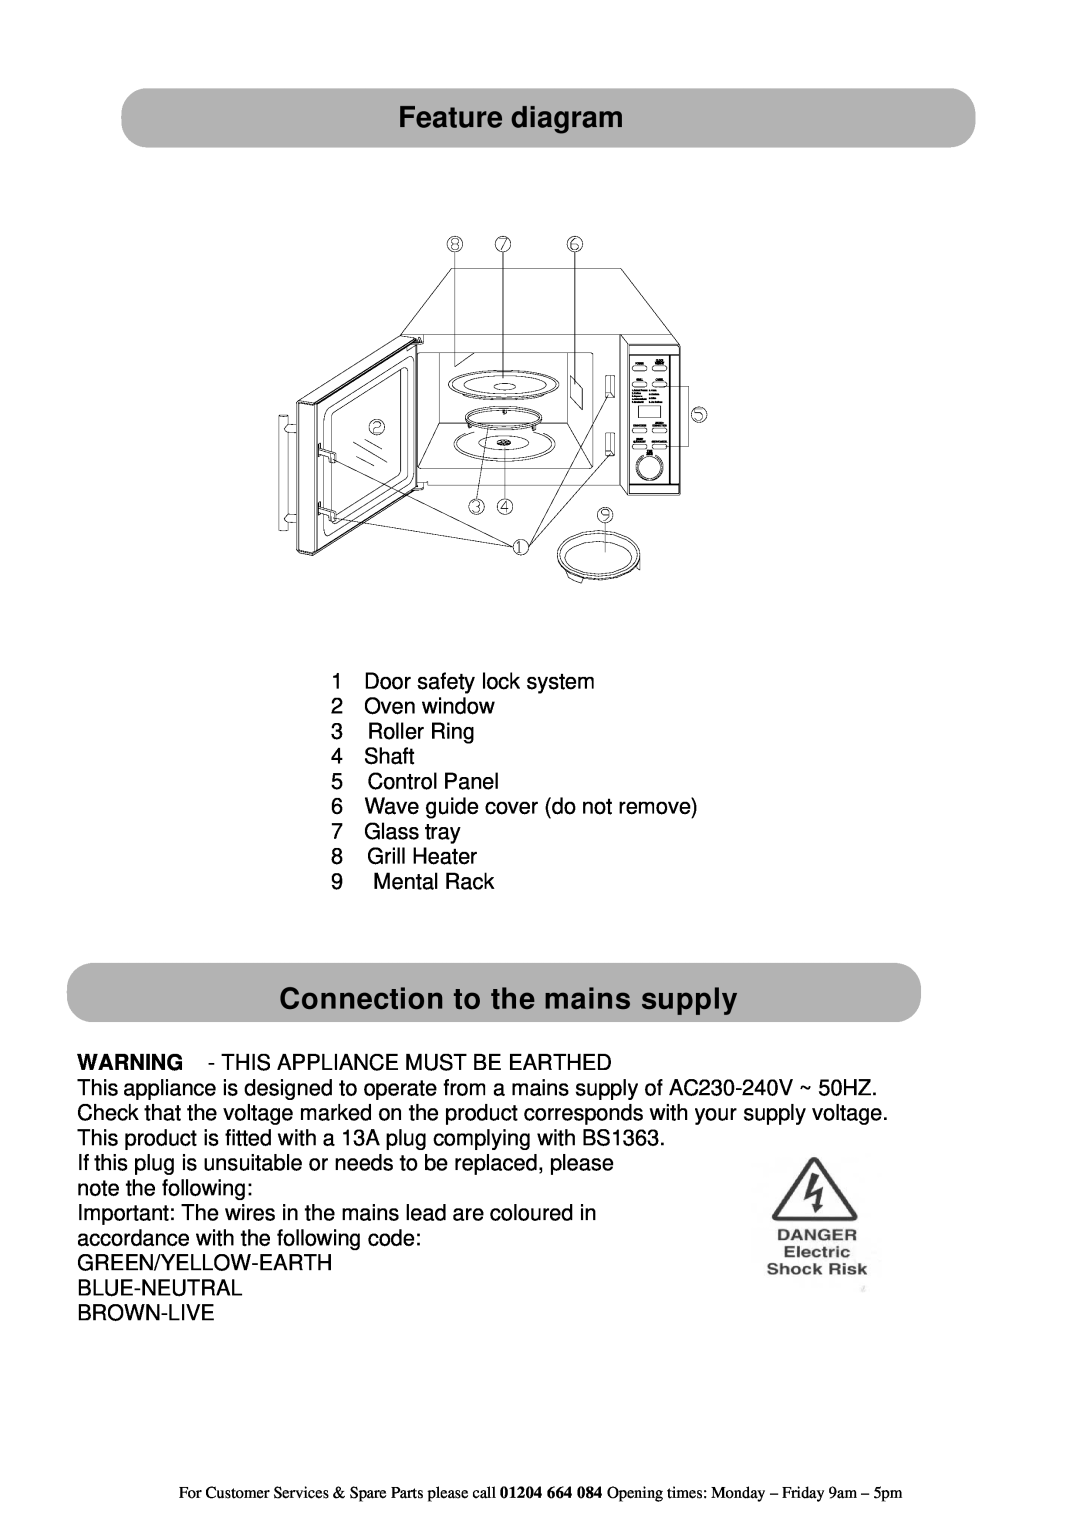 Russell Hobbs RHM2506 instruction manual Feature diagram, Connection to the mains supply 